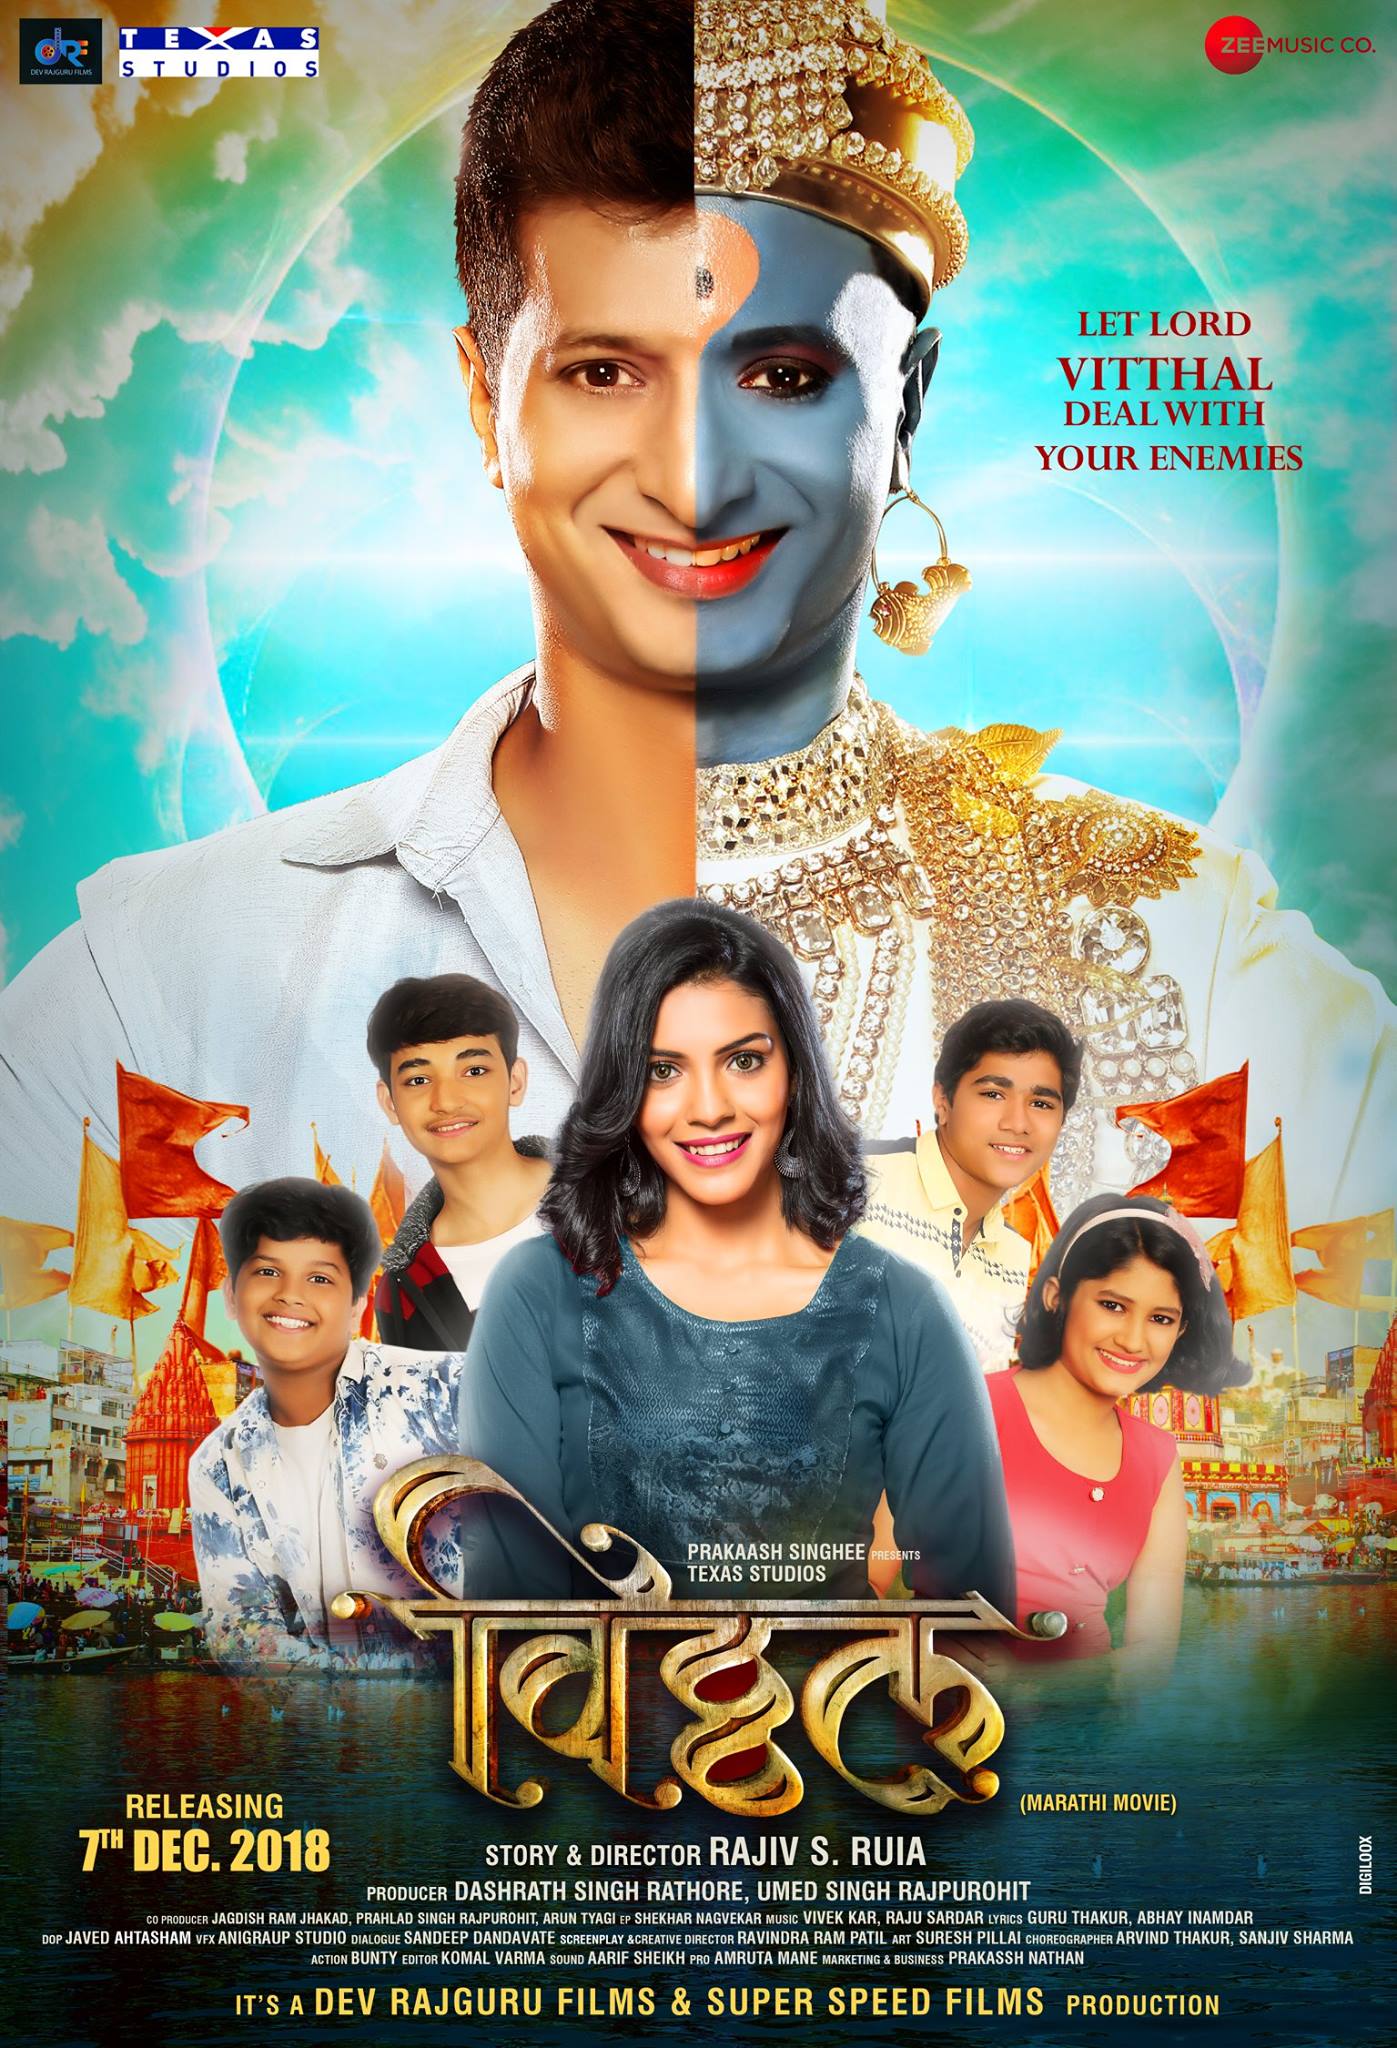 Vitthal (2019) Marathi Movie Cast Story Release Date Actress